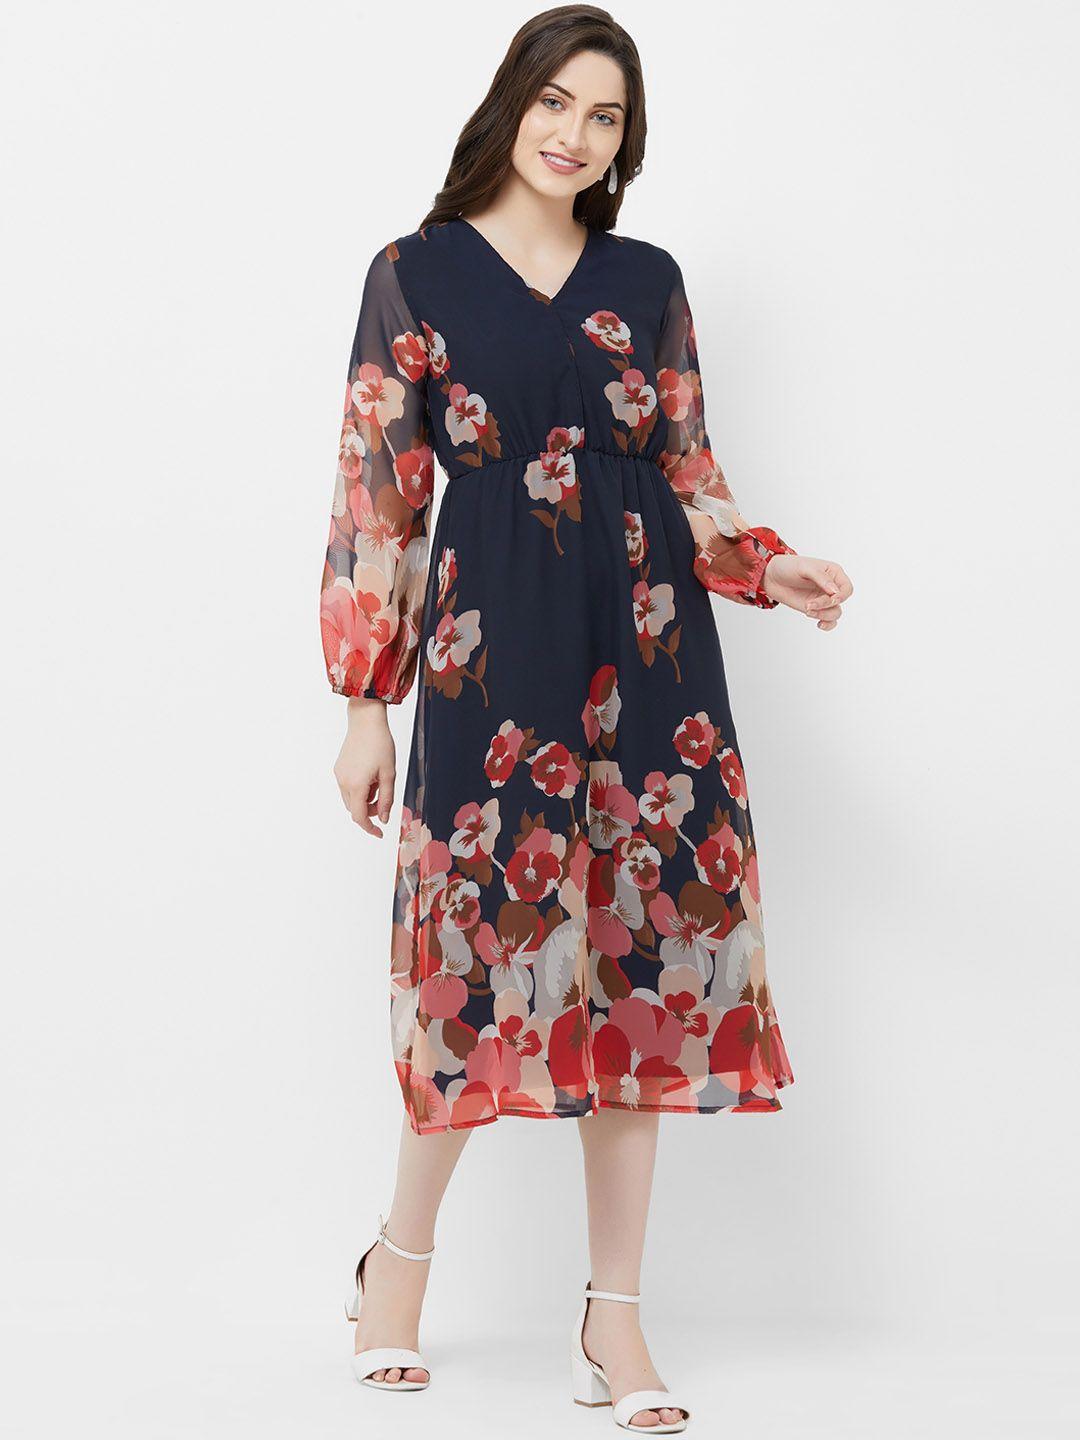 mish women navy blue floral print georgette fit and flare dress